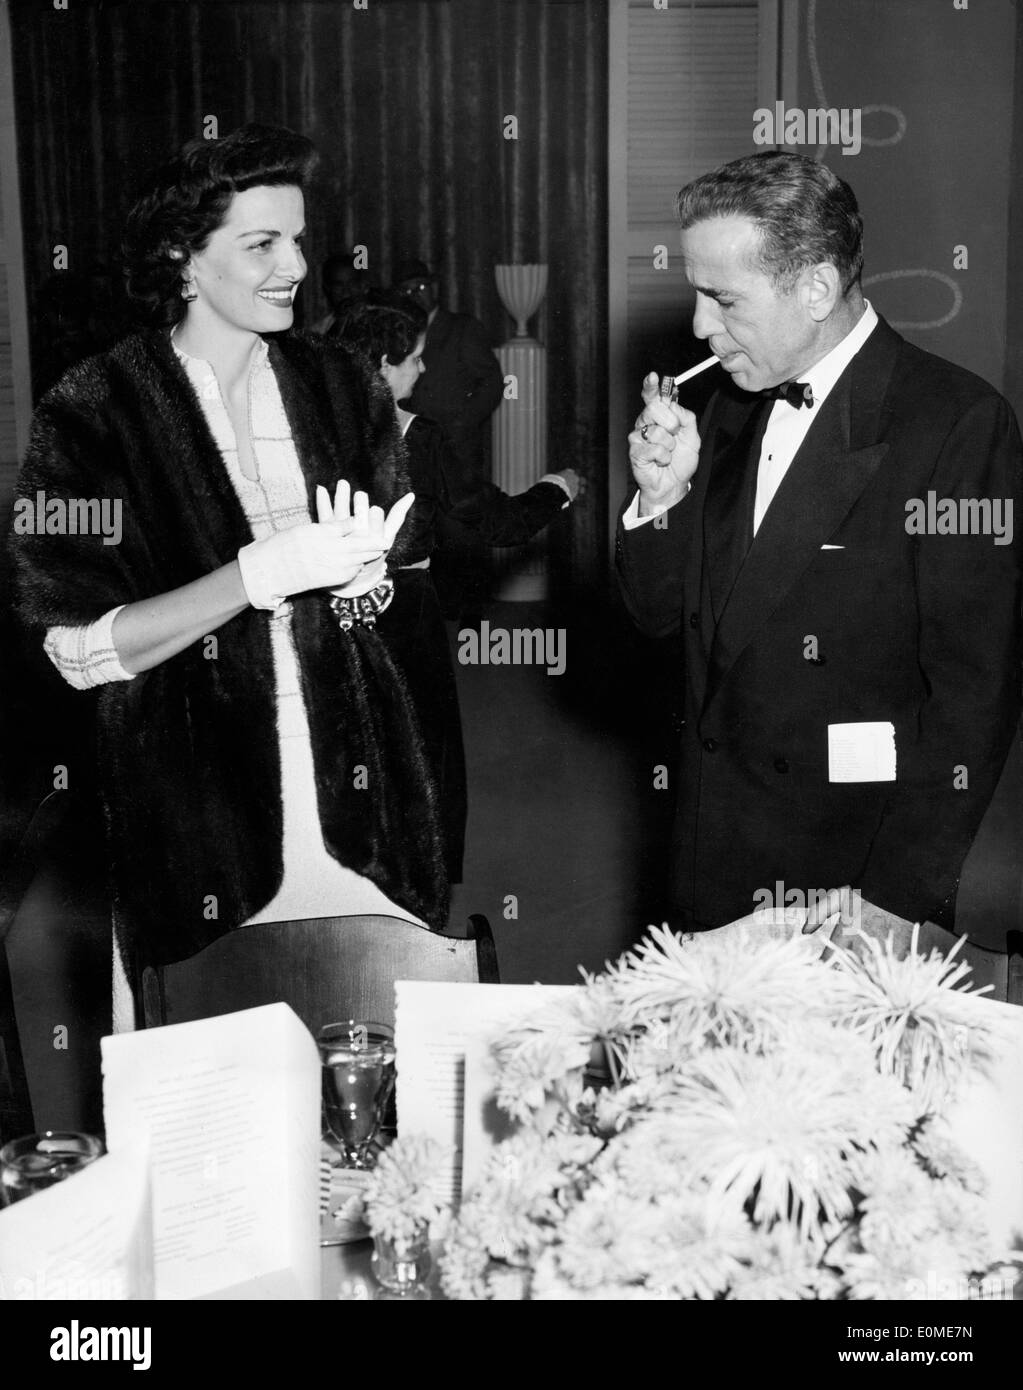 Actress Jane Russell chatting with actor Humphrey Bogart at an event Stock Photo